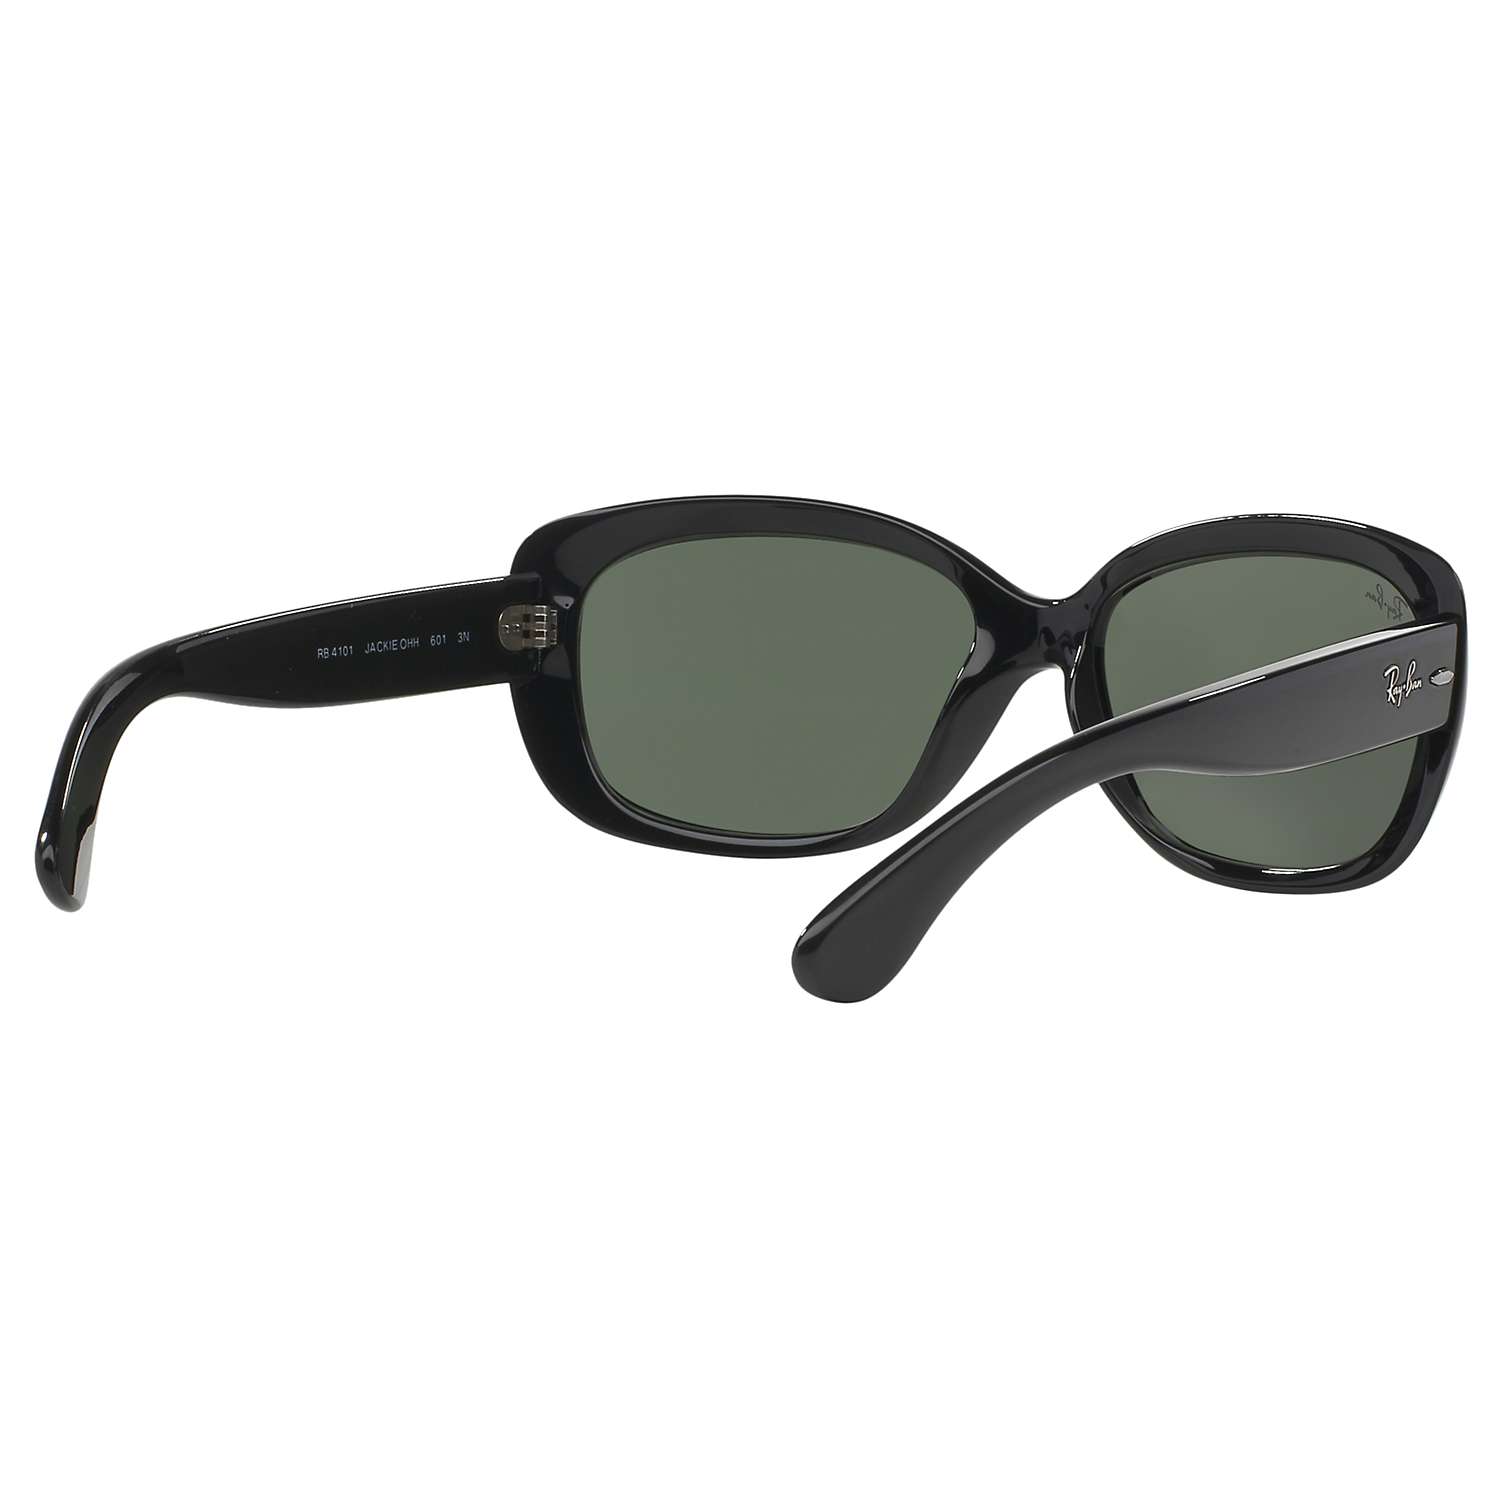 Buy Ray-Ban RB4101 Women's Jackie Ohh Rectangular Sunglasses Online at johnlewis.com